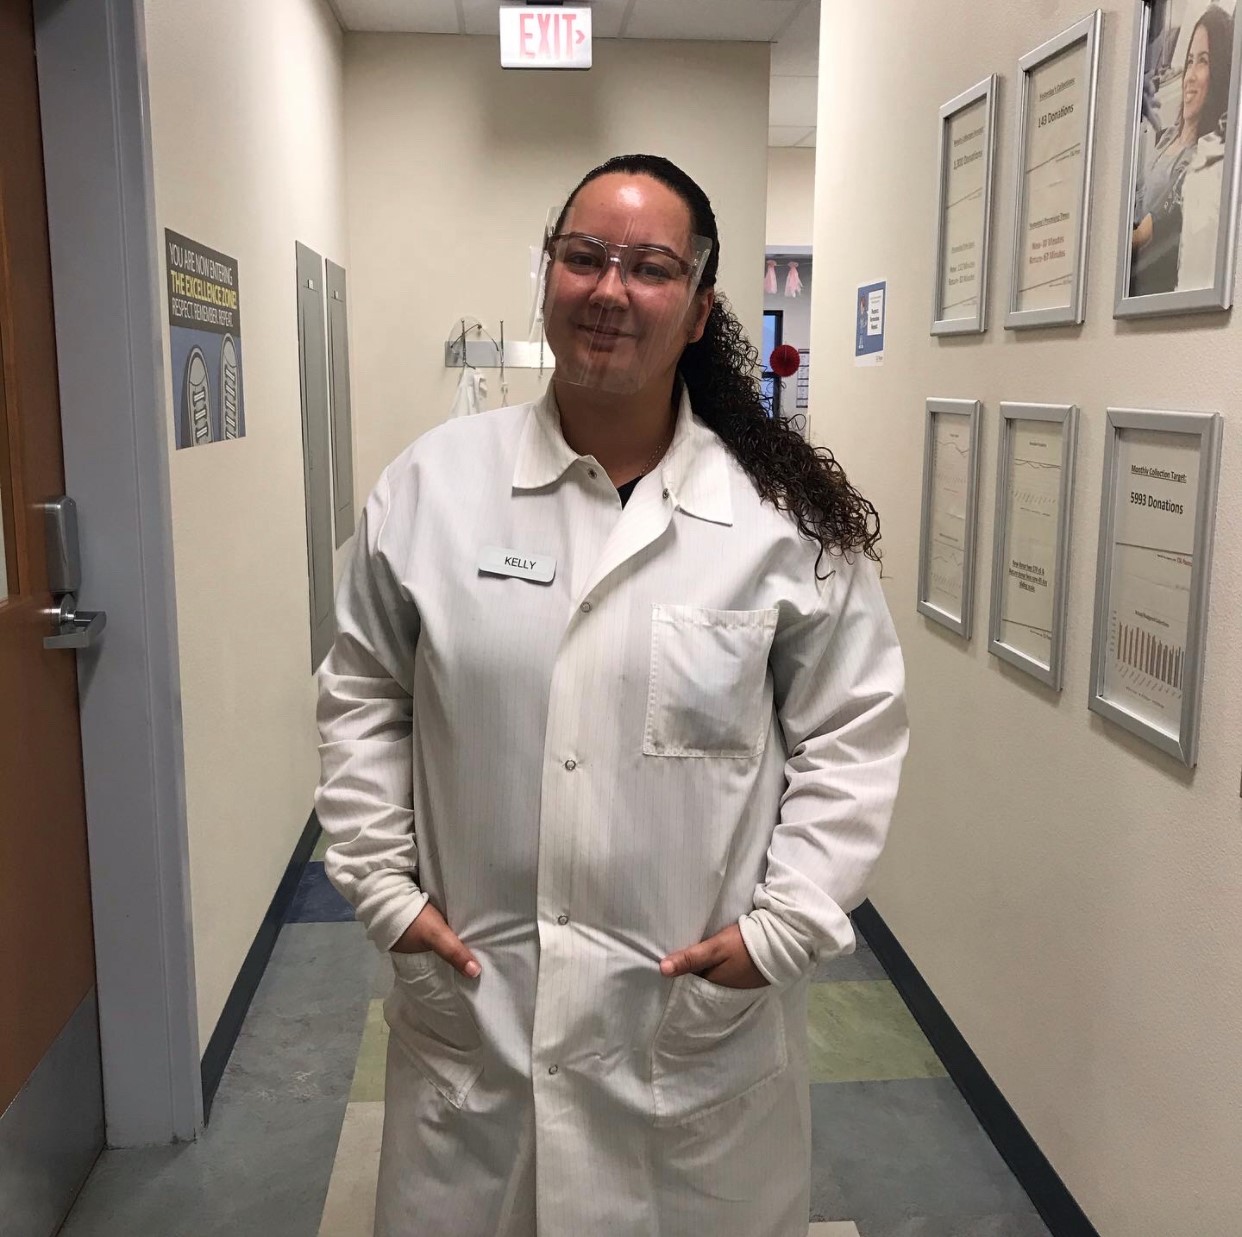 Keiser University Medical Assistants Serve on the Front Lines of the COVID19 Pandemic